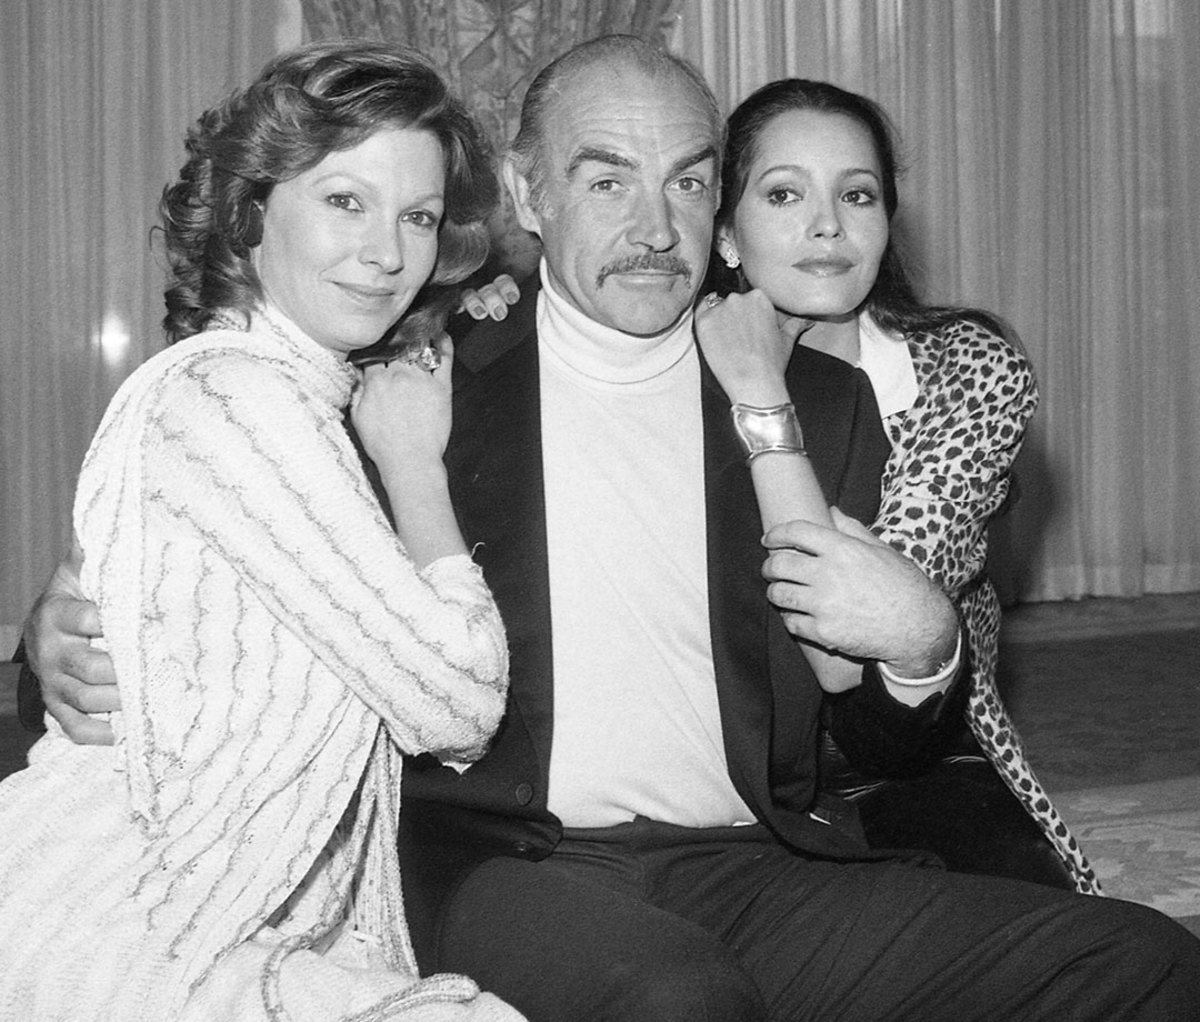 Sean Connery with 'Never Say Never Again' co-stars Barbara Carrera (right) and Pamela Salem